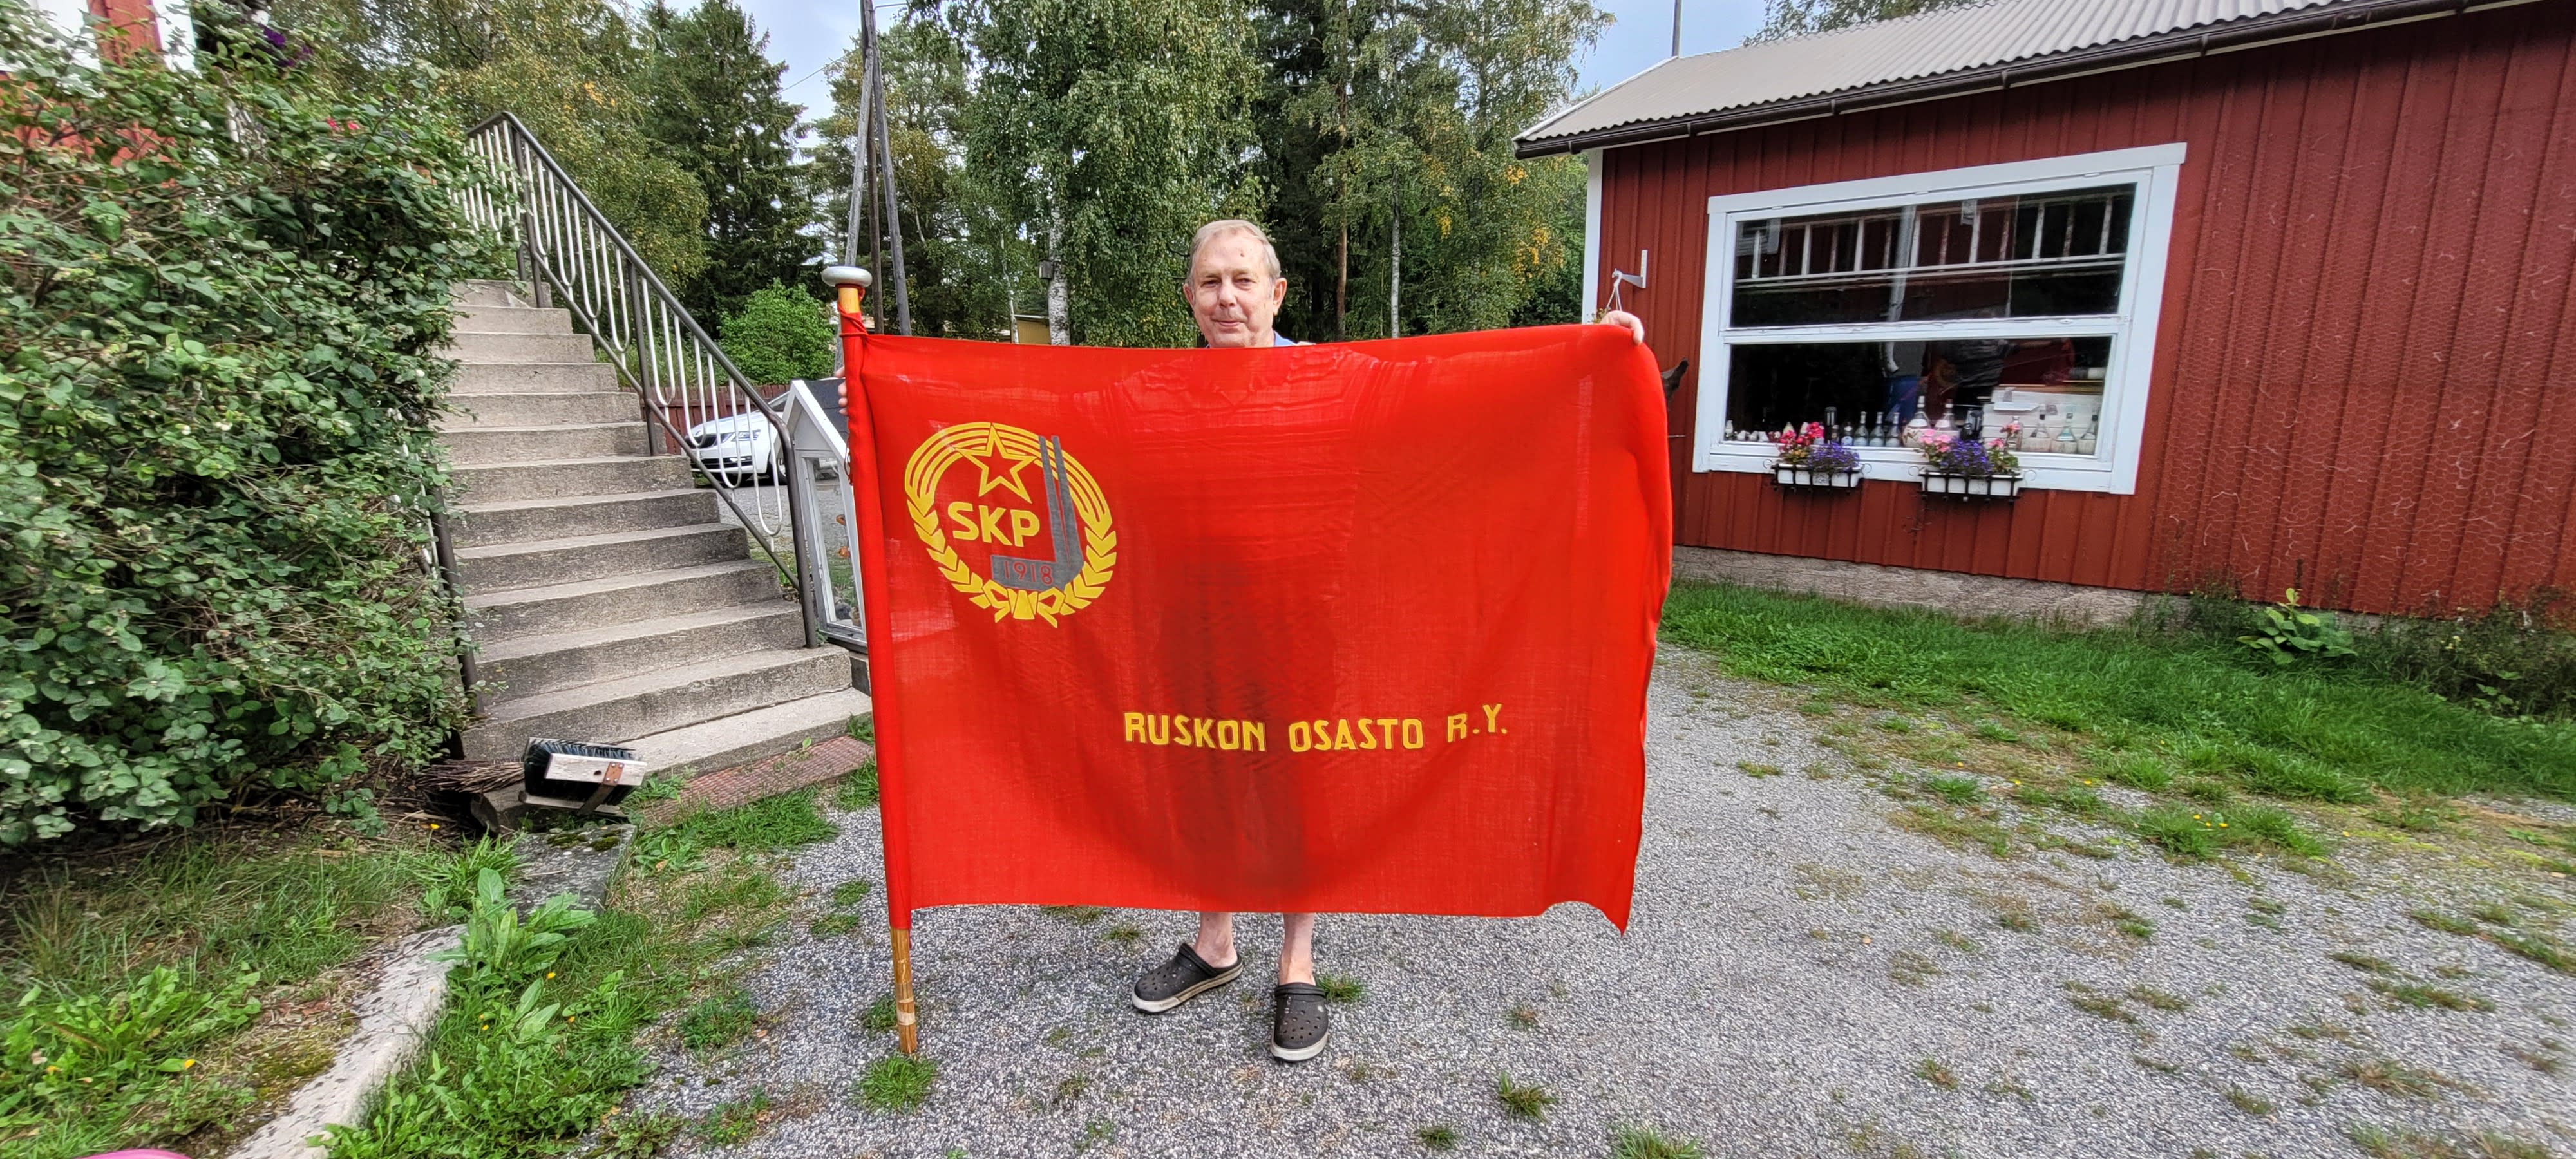 The Communist Party of Finland continues to use symbols of the Soviet Union despite a possible ban